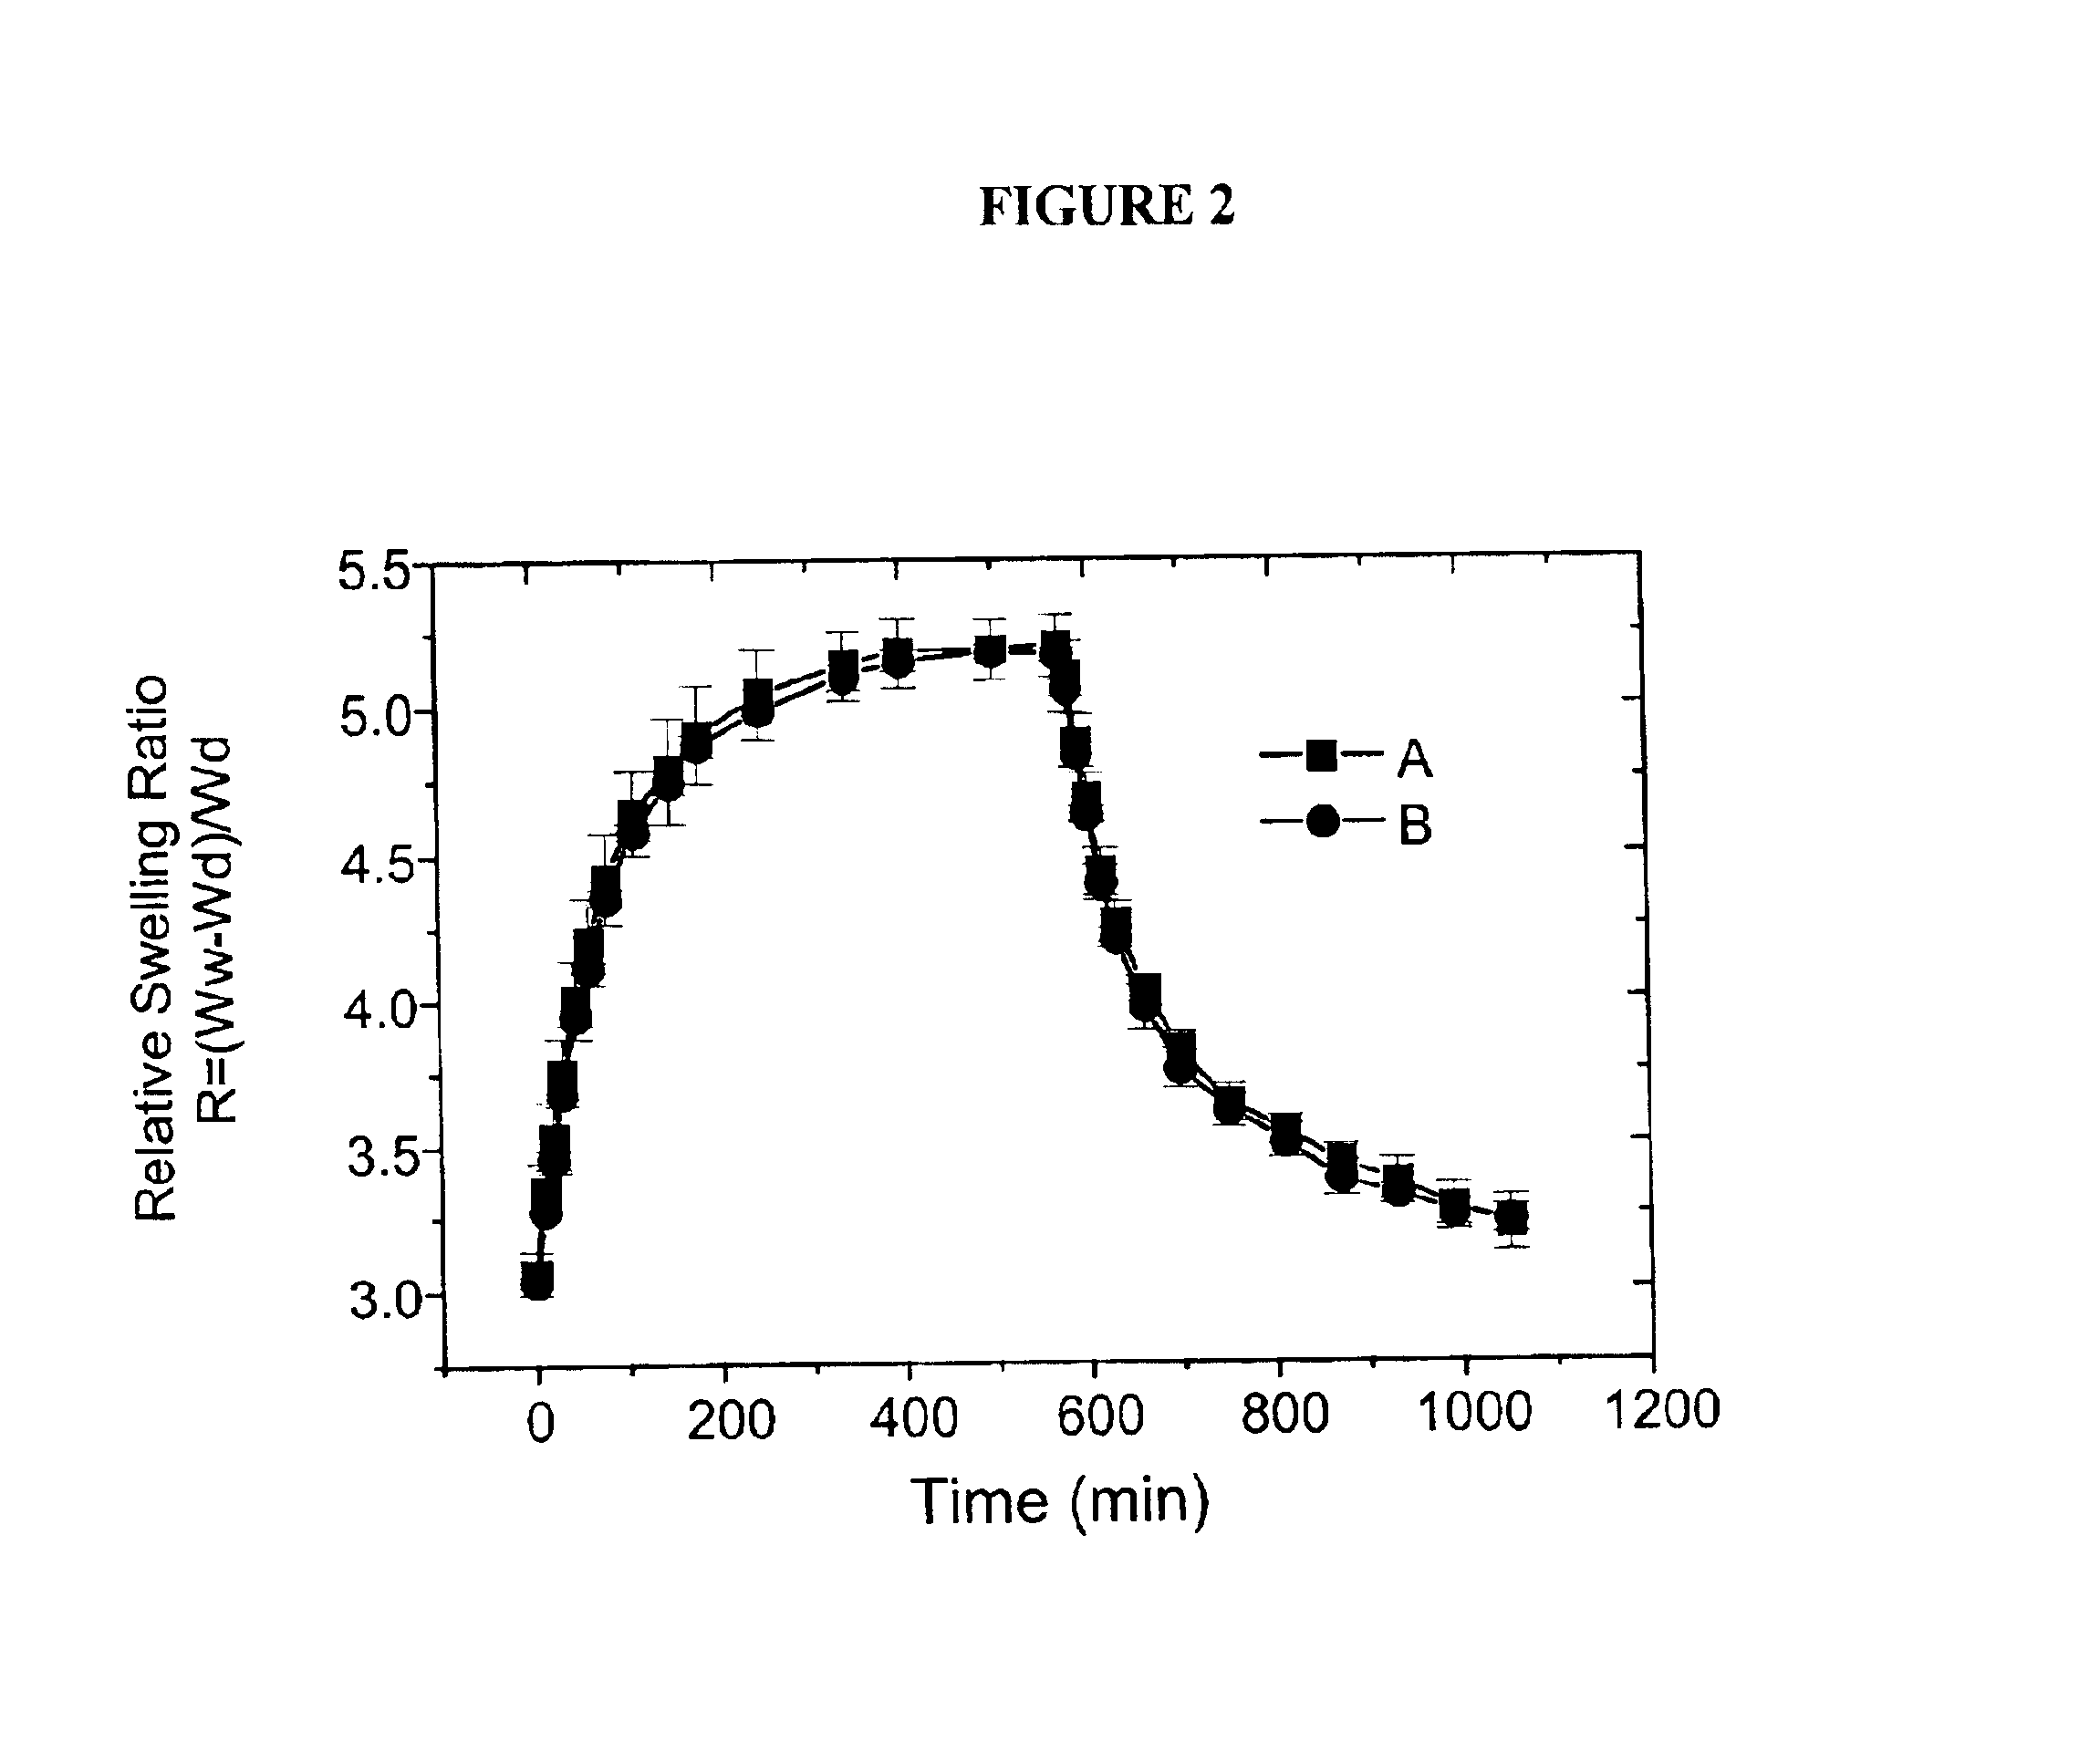 Polymer matrix containing catalase co-immobilized with analytic enzyme that generates hydrogen peroxide